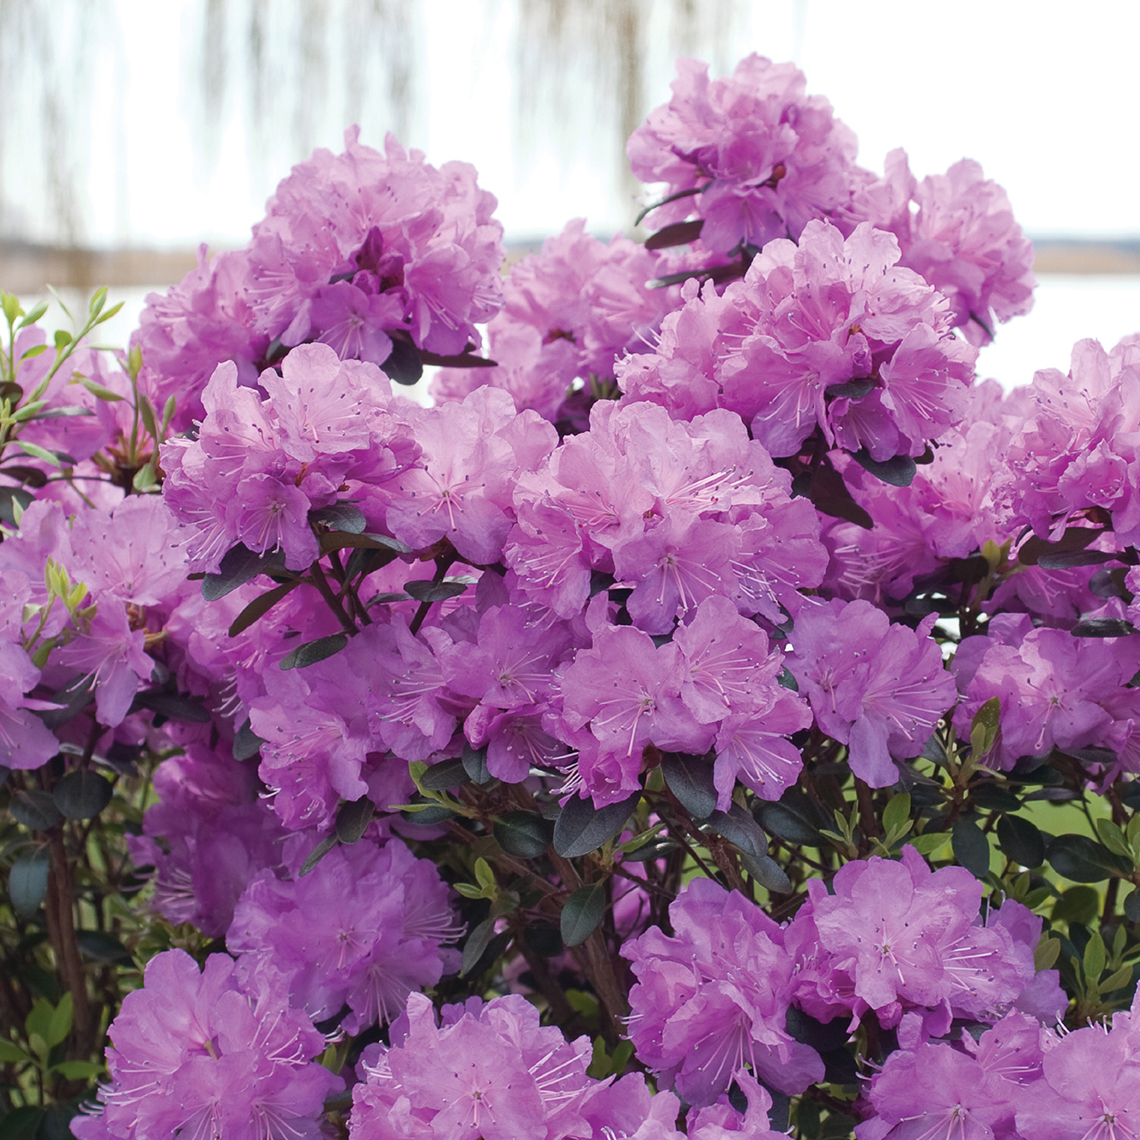 Pale purple blooms of Rhododendron Amy Cotta with lake and willow tree in the background